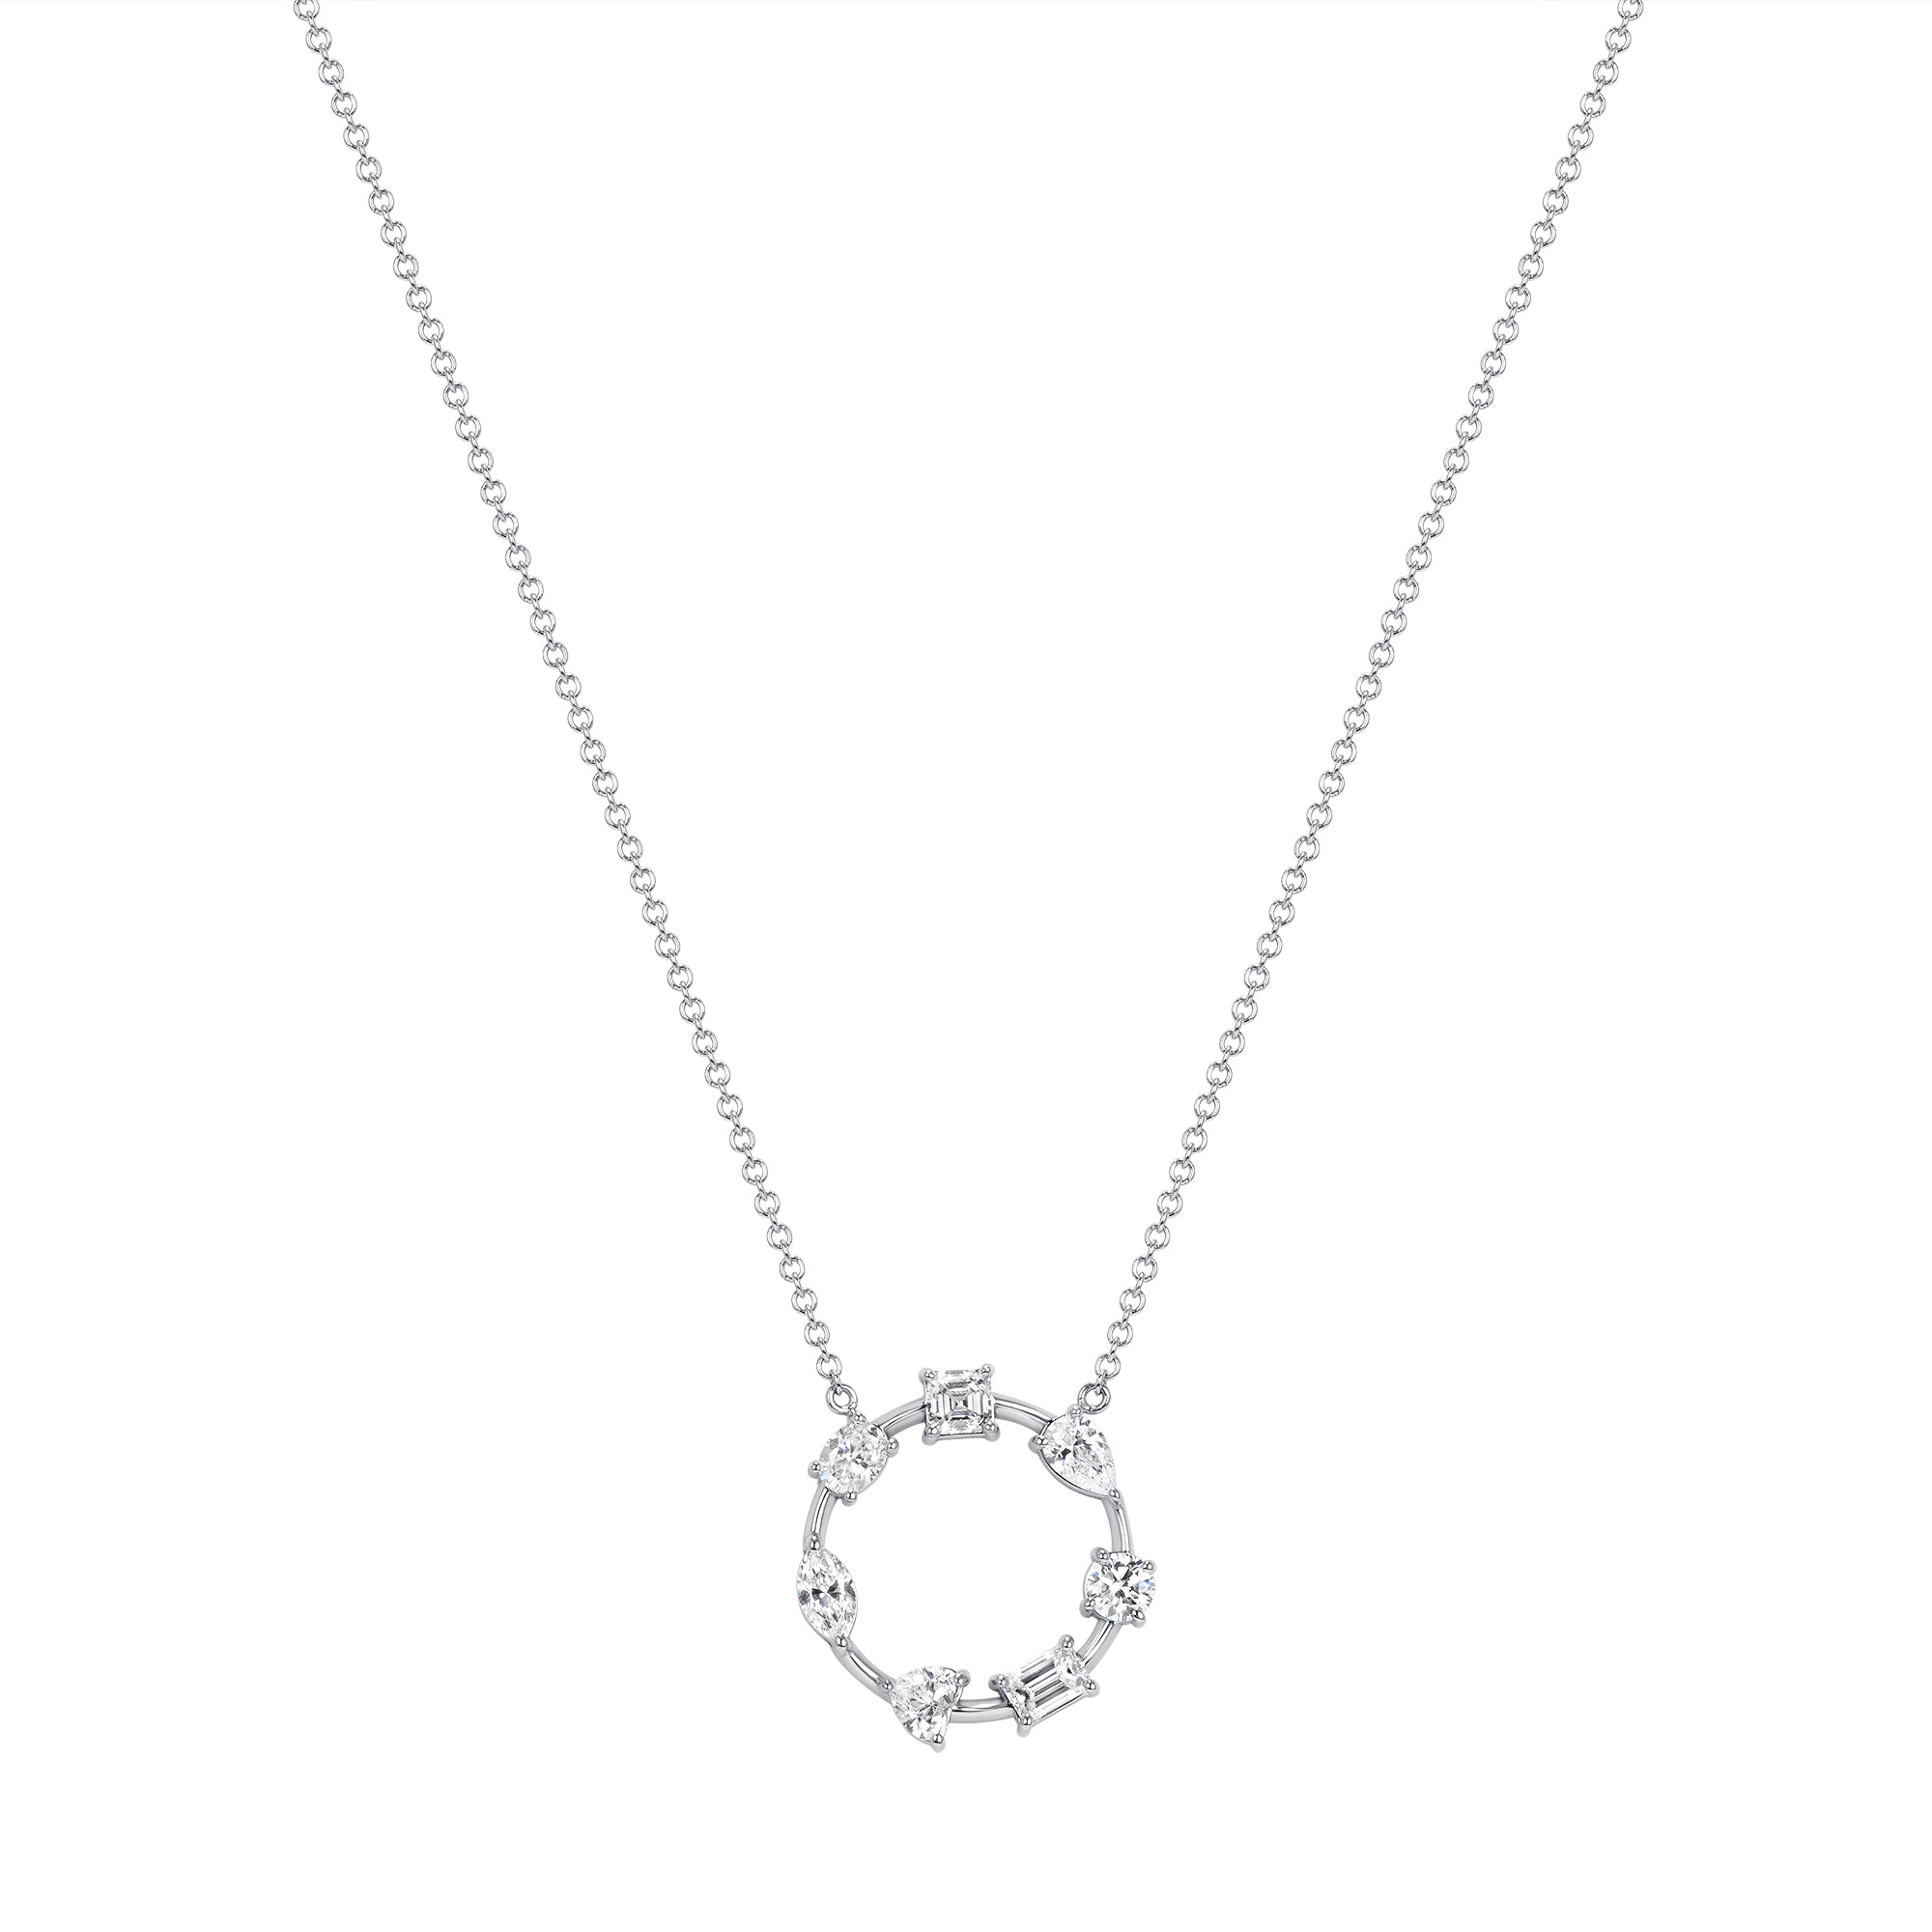 1.17ct. Fancy Shape Diamond Round Pendant Necklace in 18K White Gold